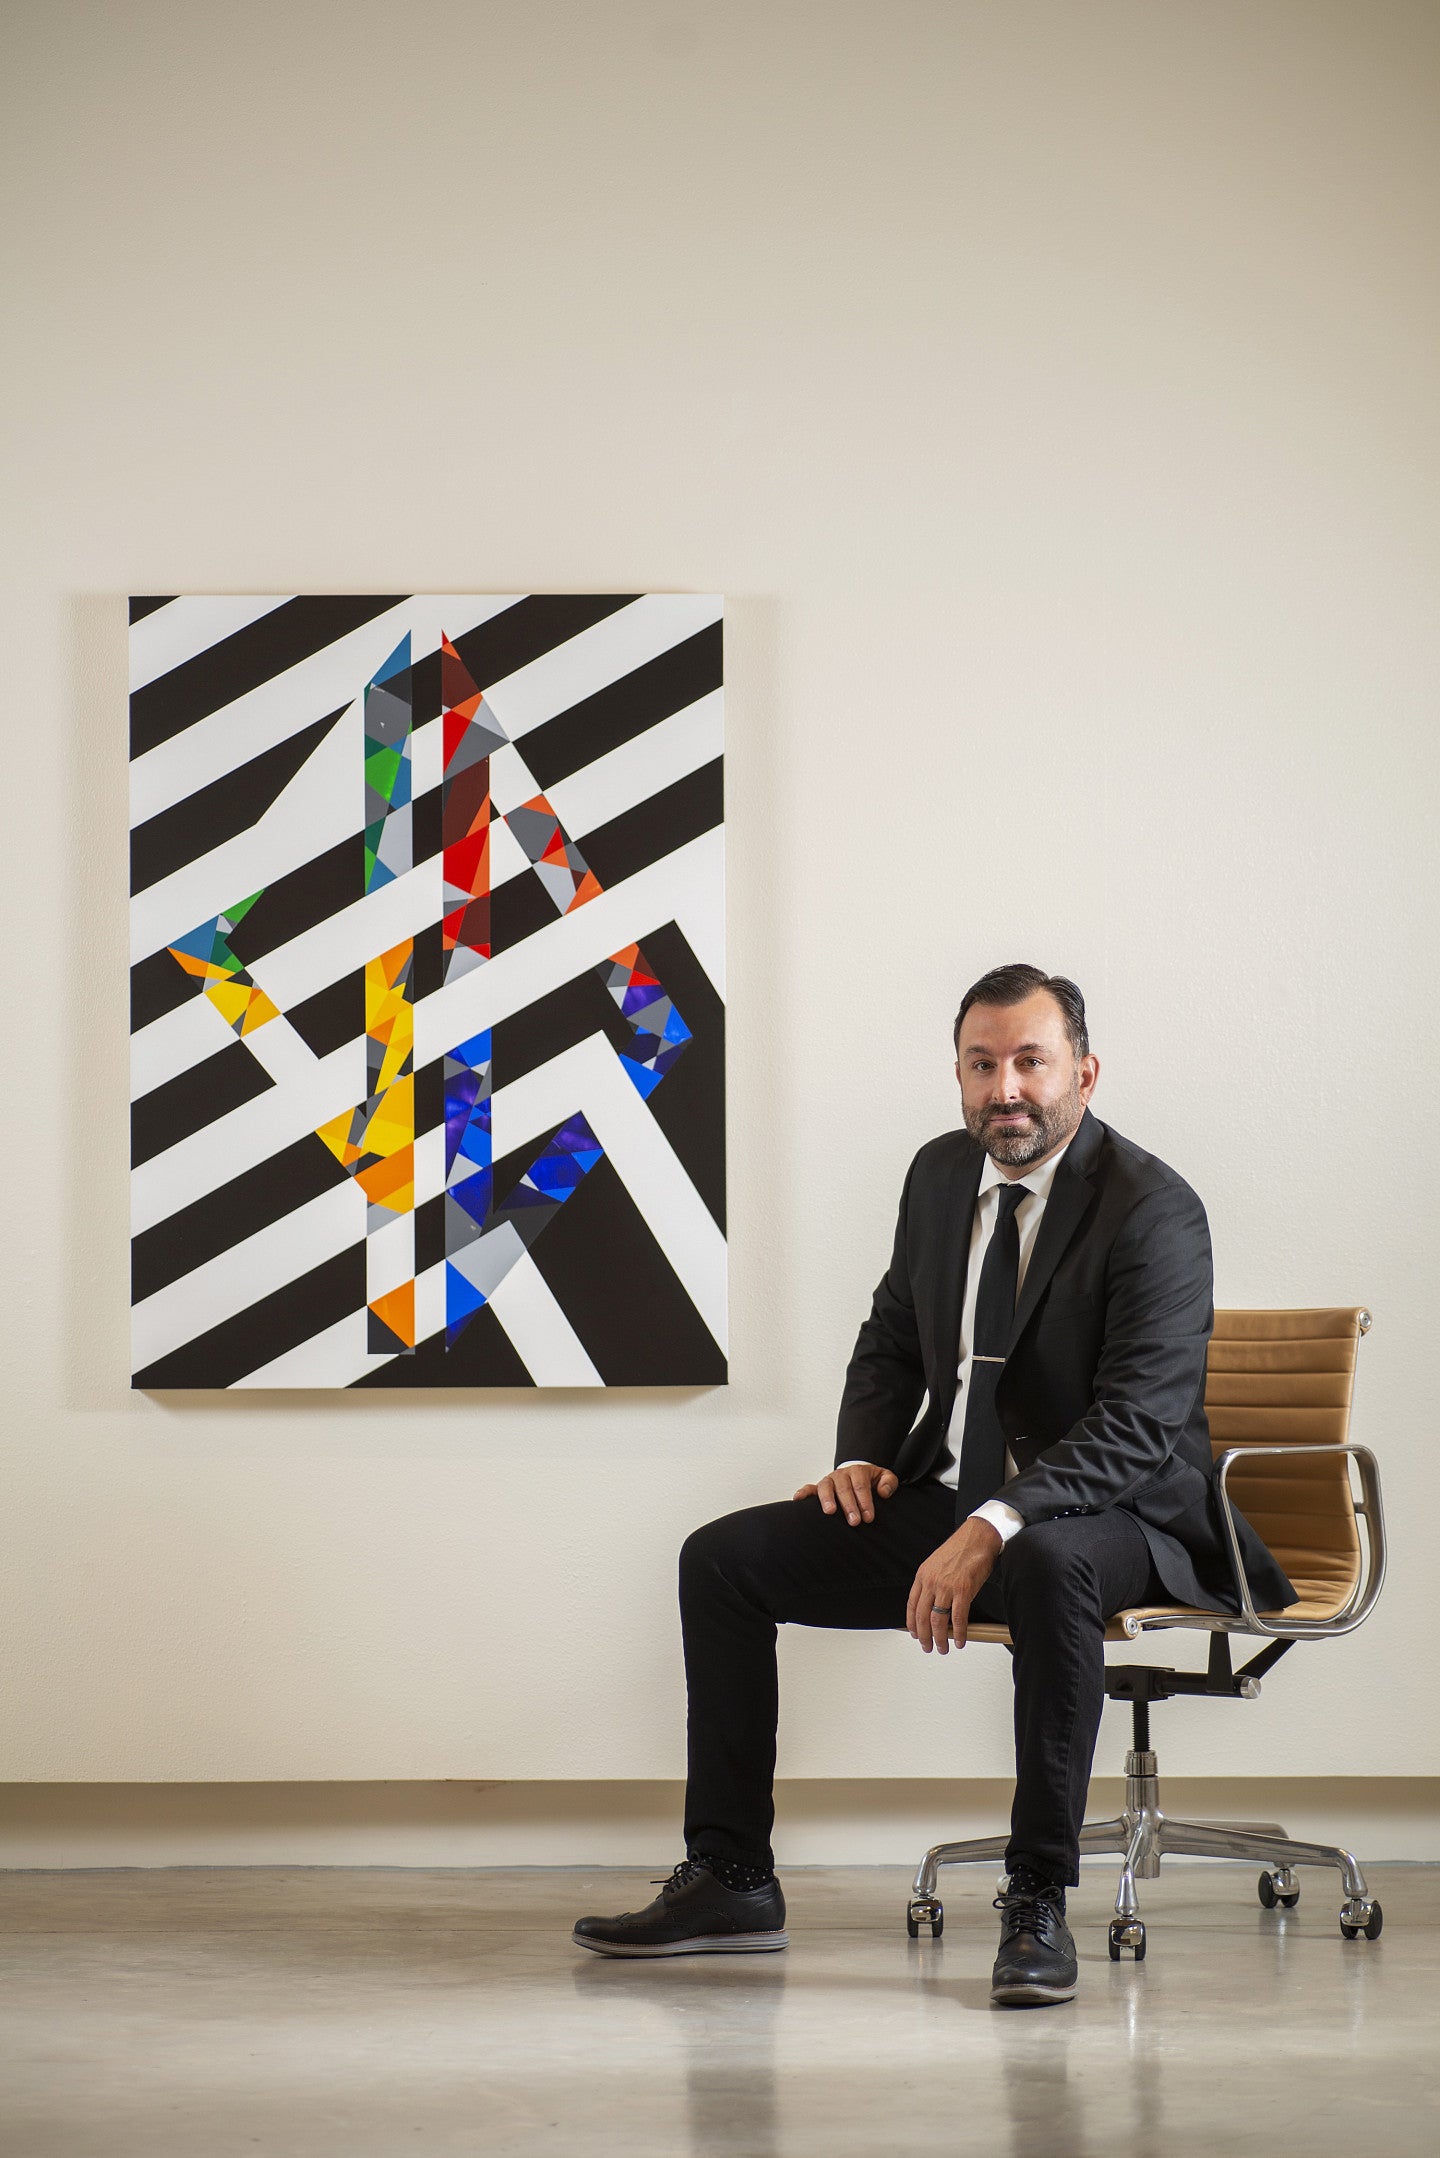 Image of Scott Malbaurn next to his painting